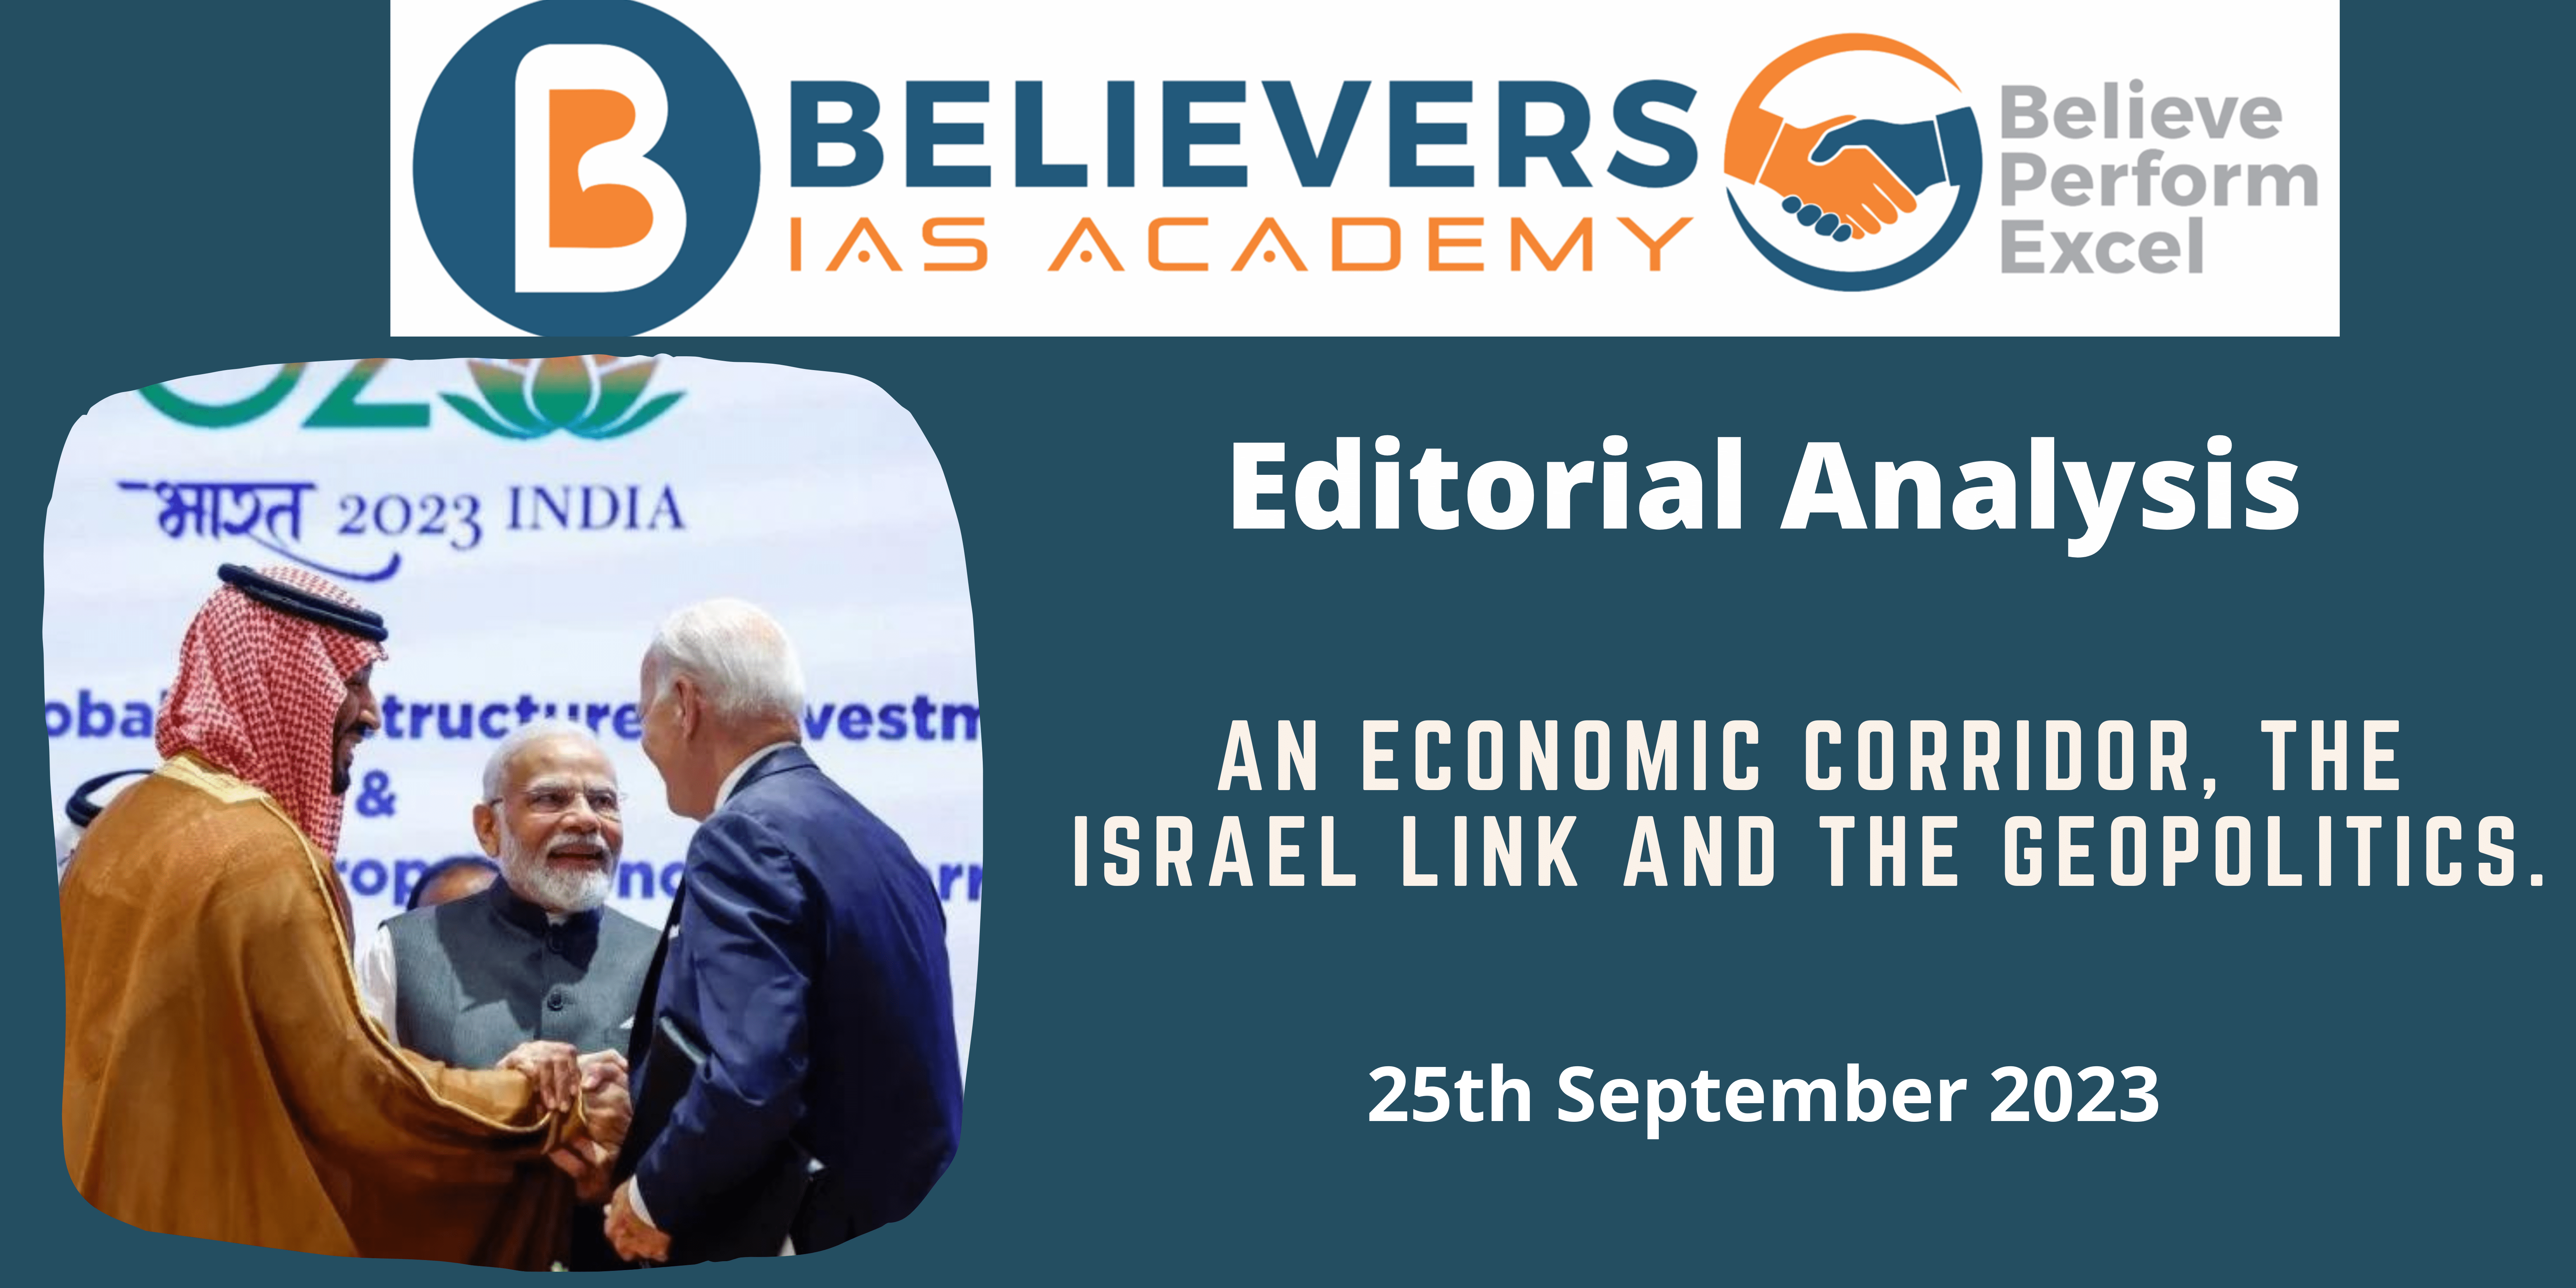 An economic corridor, the Israel link and the geopolitics.